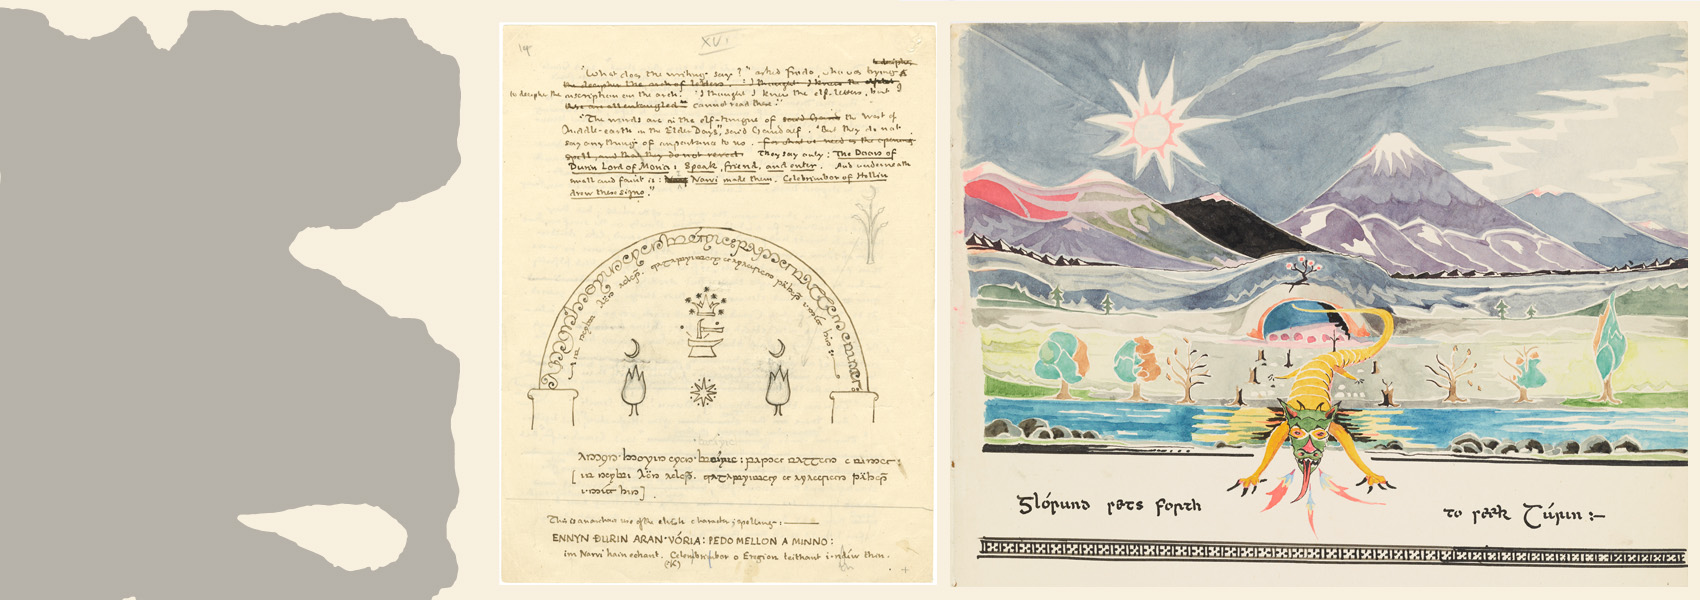 A composite image of artwork from J.R.R. Tolkien: The Art of the Manuscript 